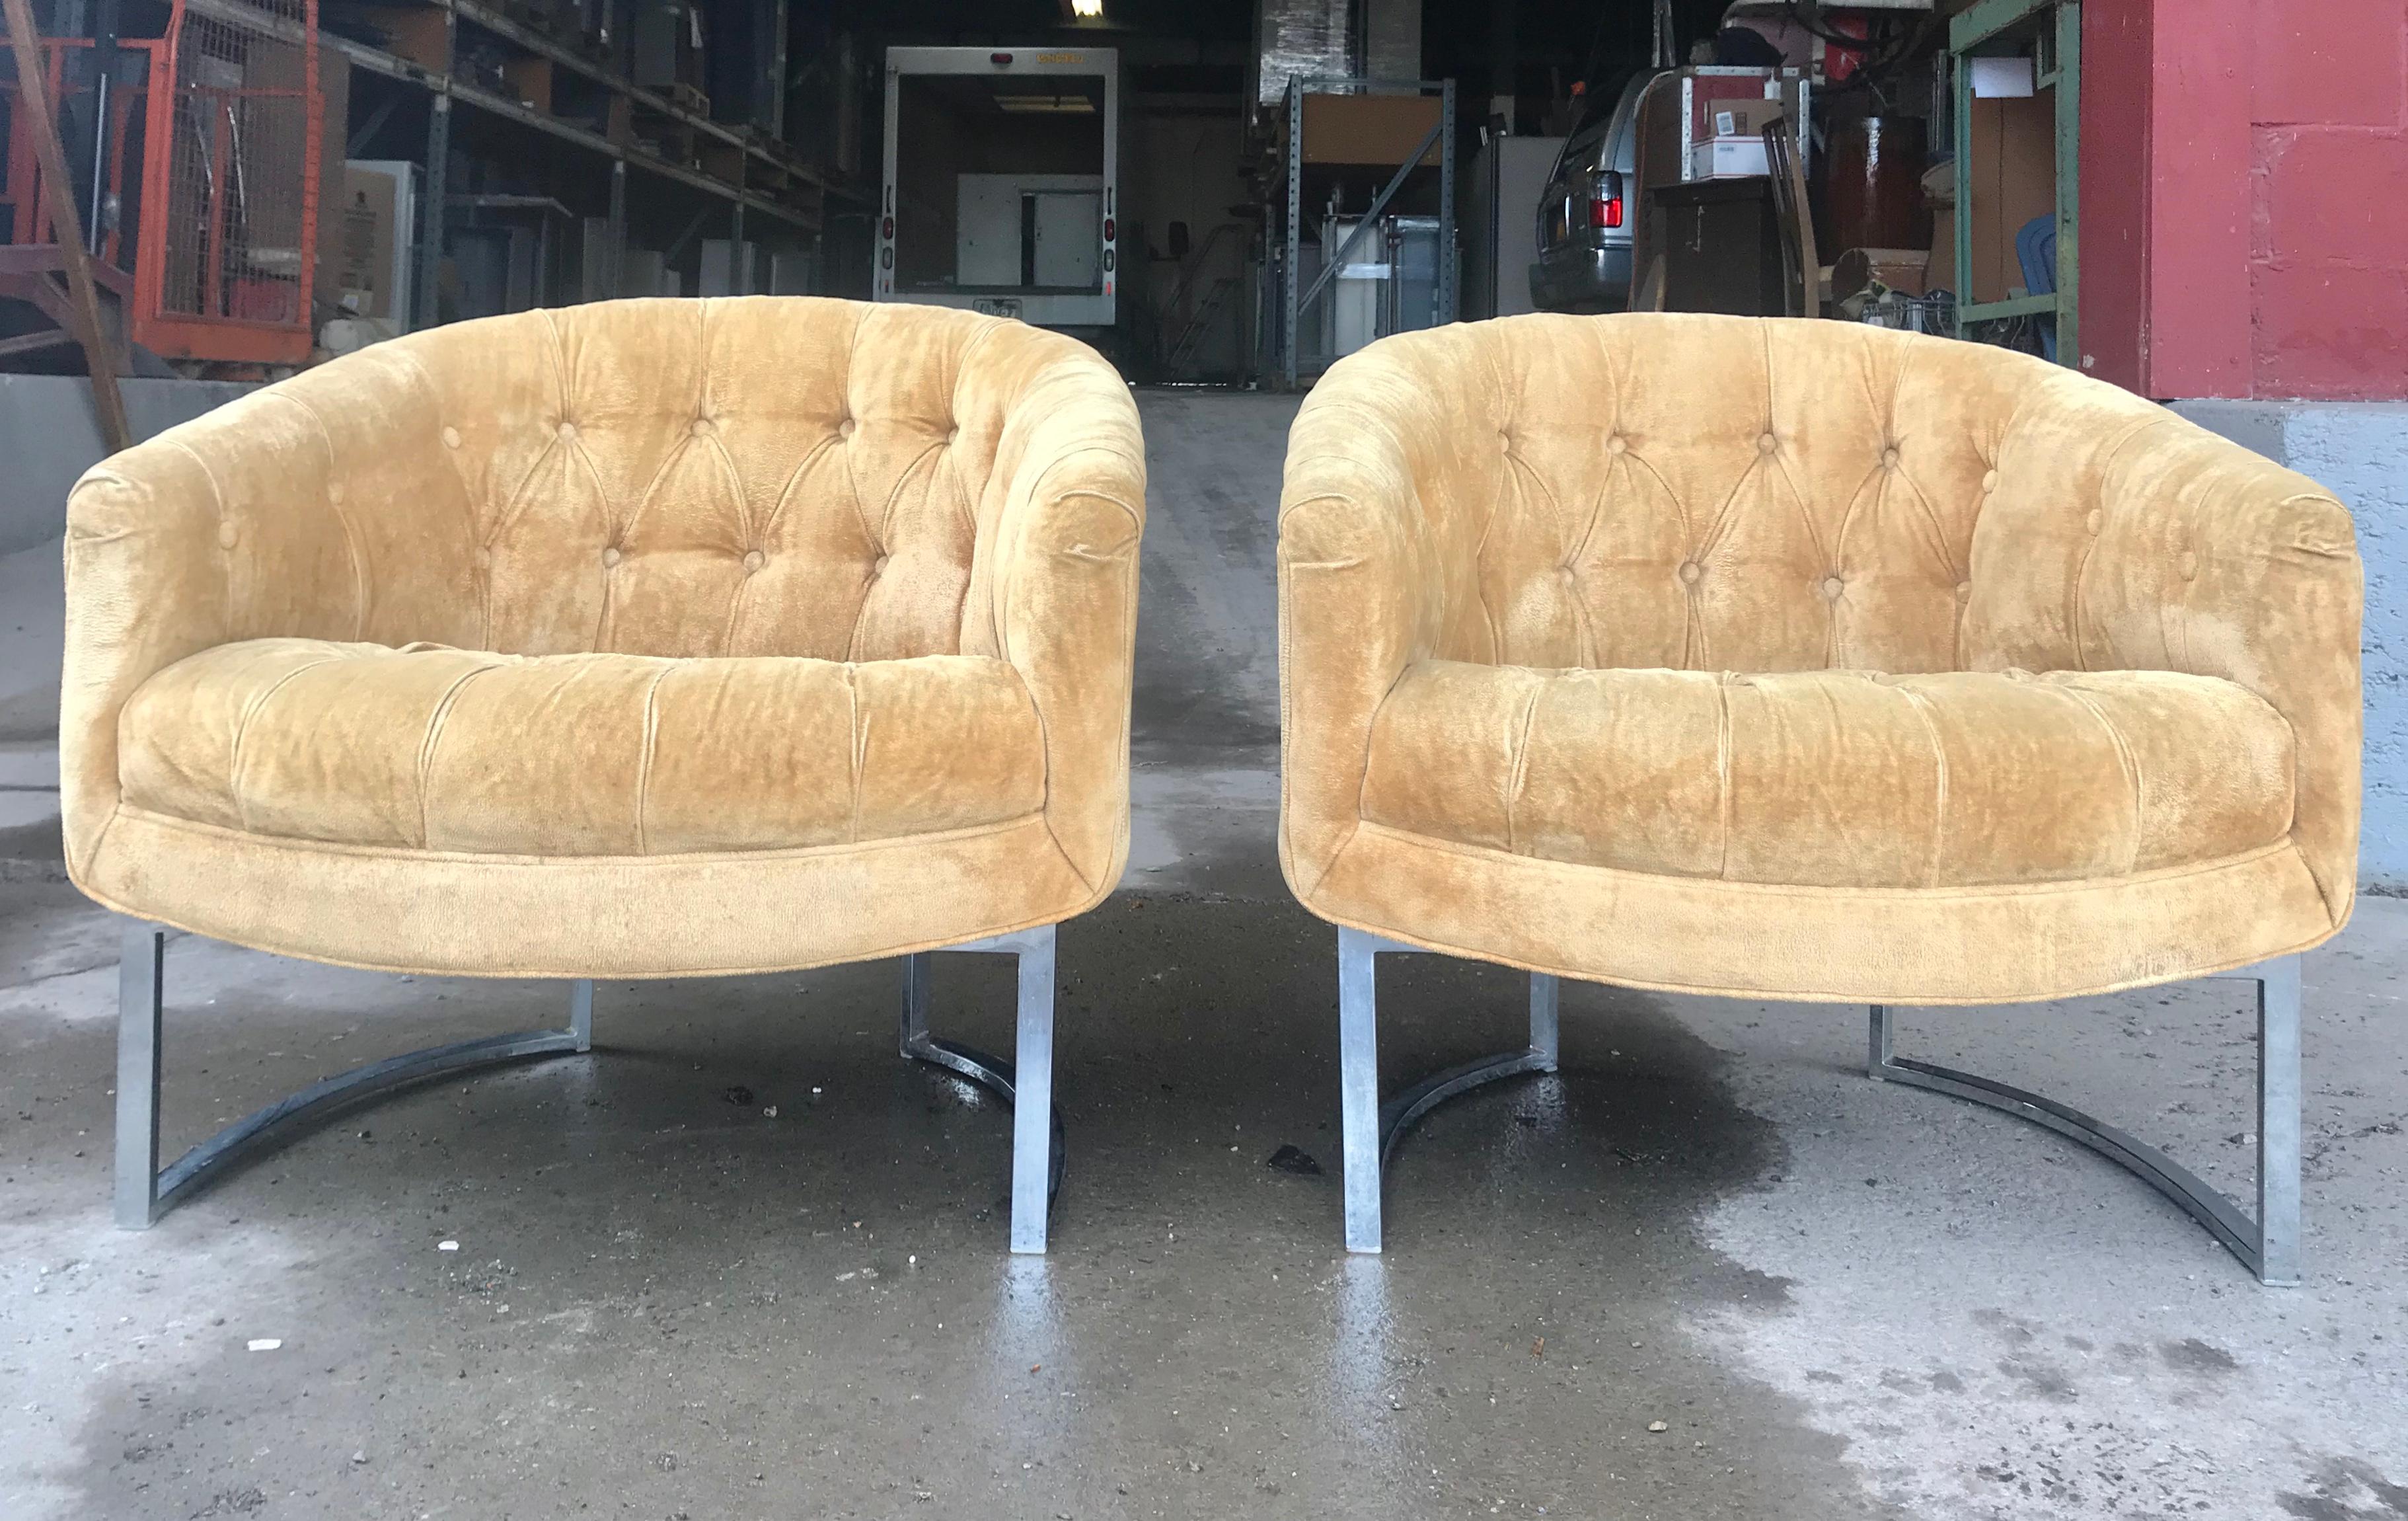 Pair of modernist button tufted barrel chairs by Woodmark Originals, reminiscent of Classic designs by Milo Baughman, superior quality and construction, retains original pale yellow velvet fabric, flat steel, chromed bases, original labels.